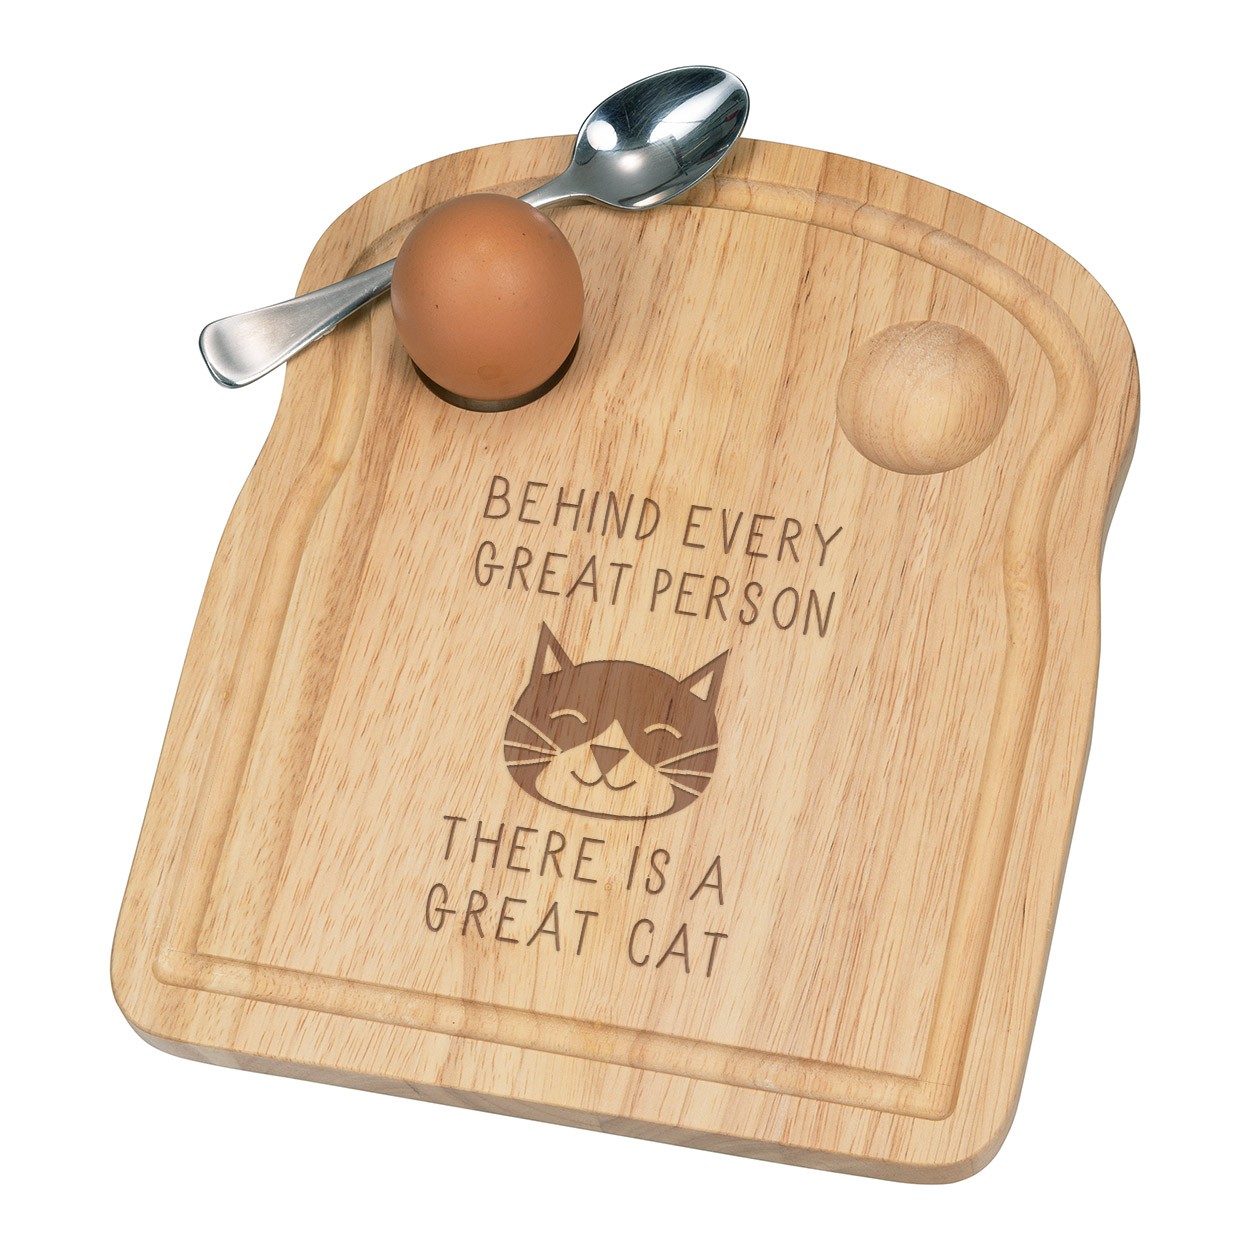 Behind Every Great Person Is A Great Cat Breakfast Dippy Egg Cup Board Wooden